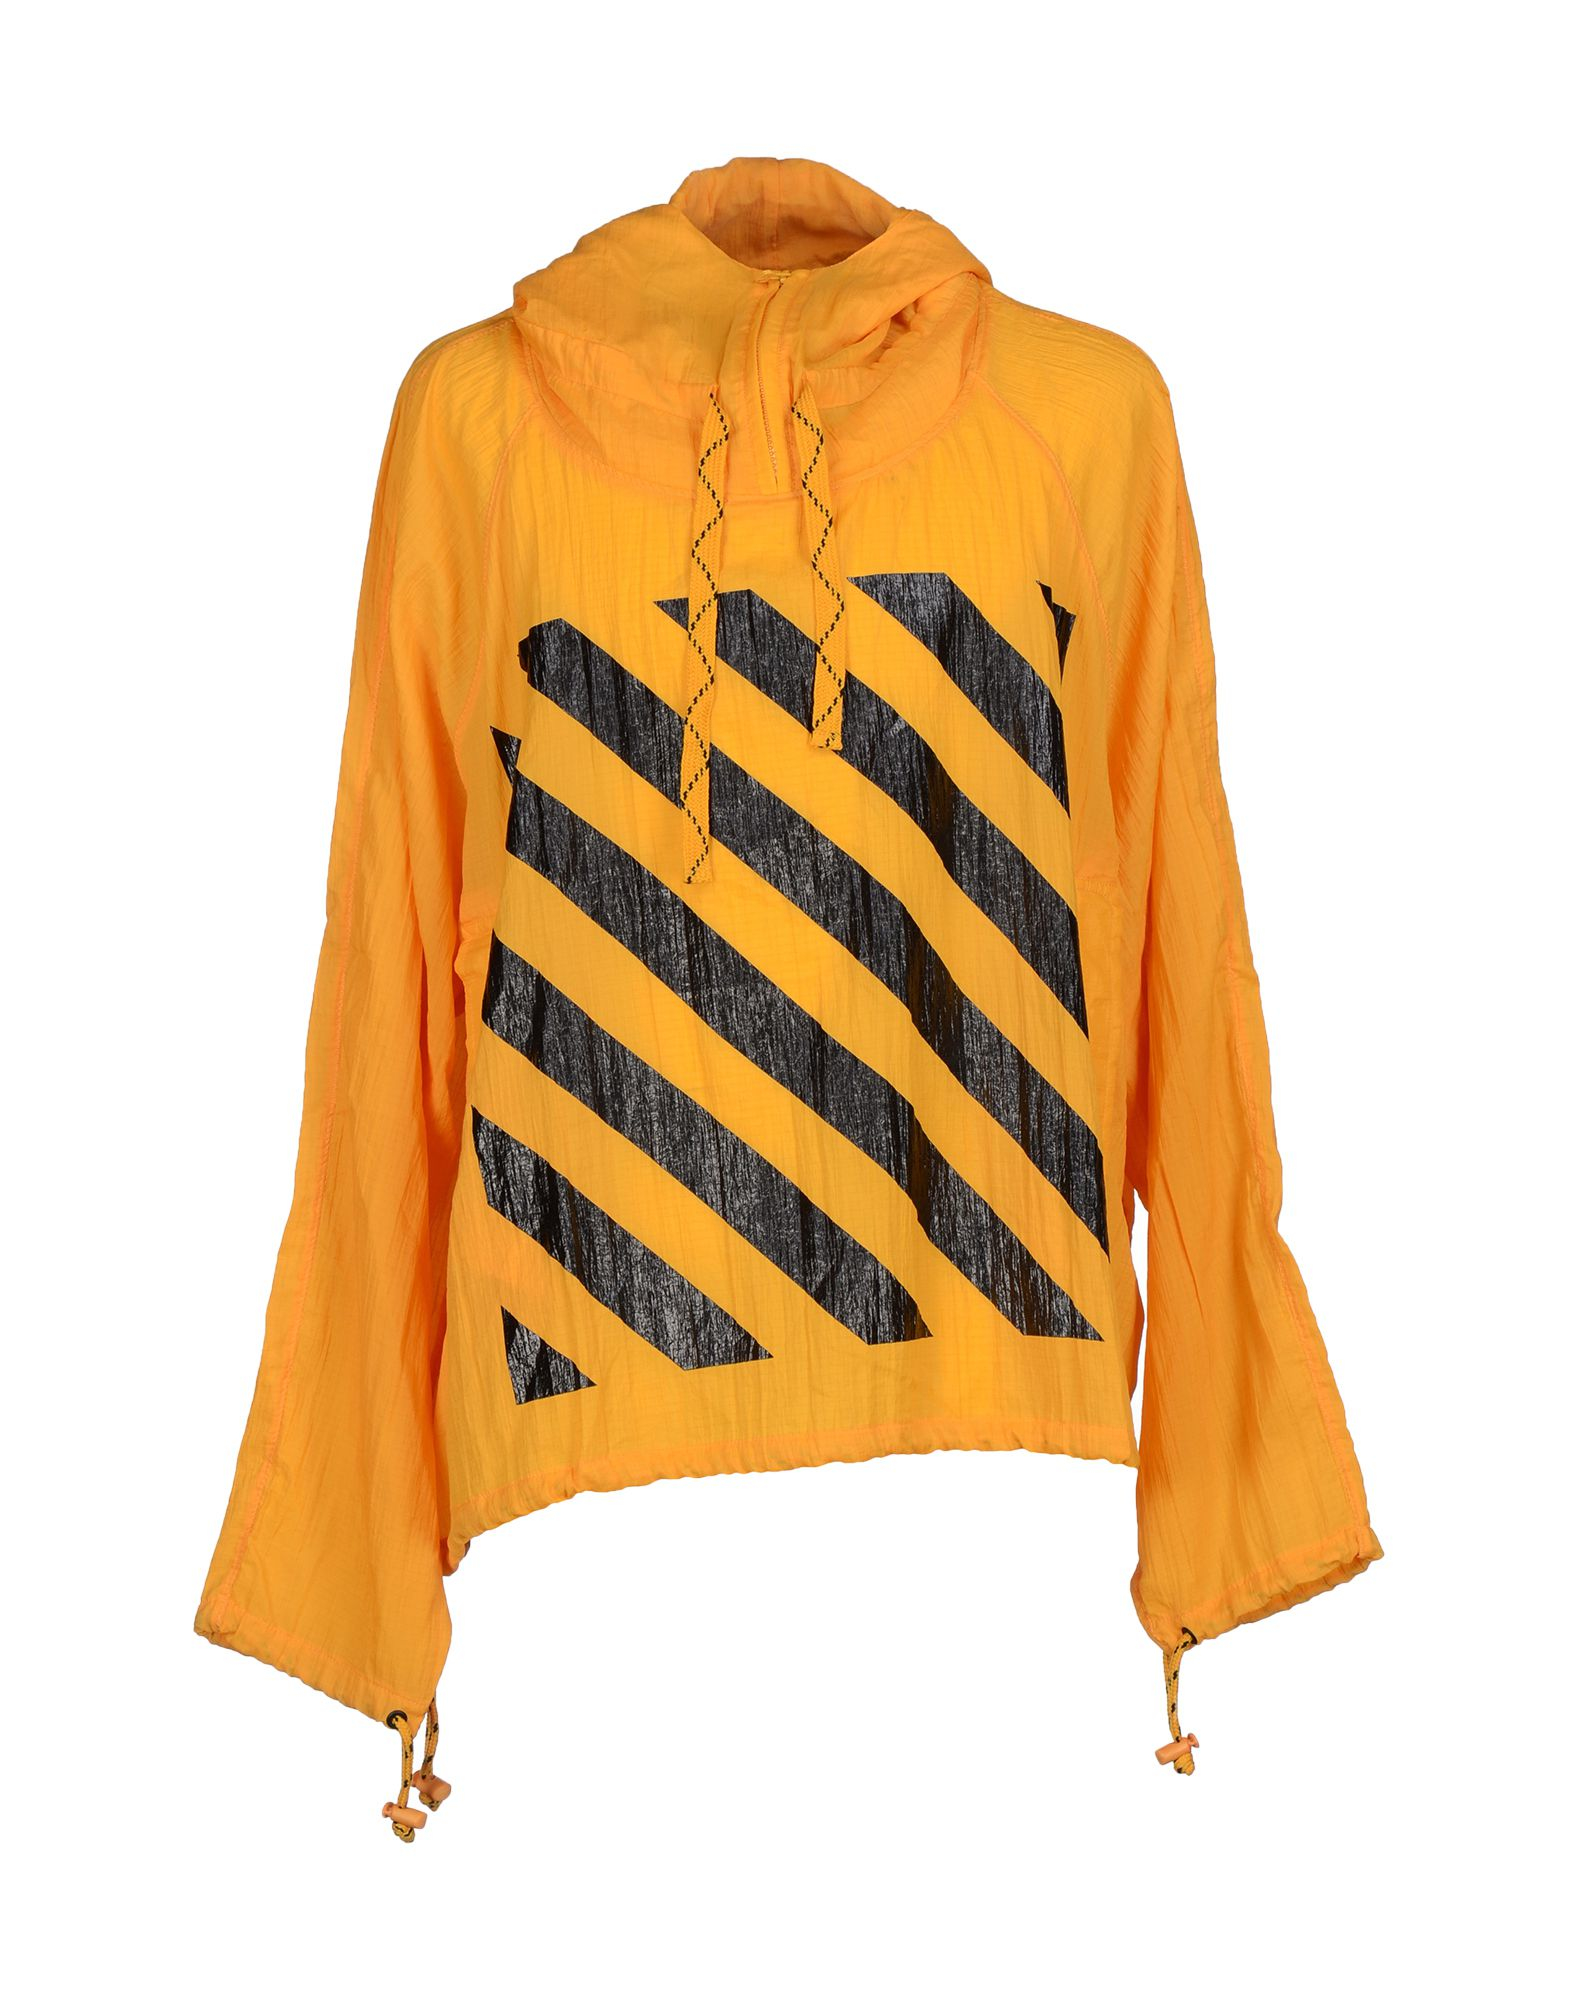 Off-White c/o Virgil Abloh Jacket in Yellow - Lyst